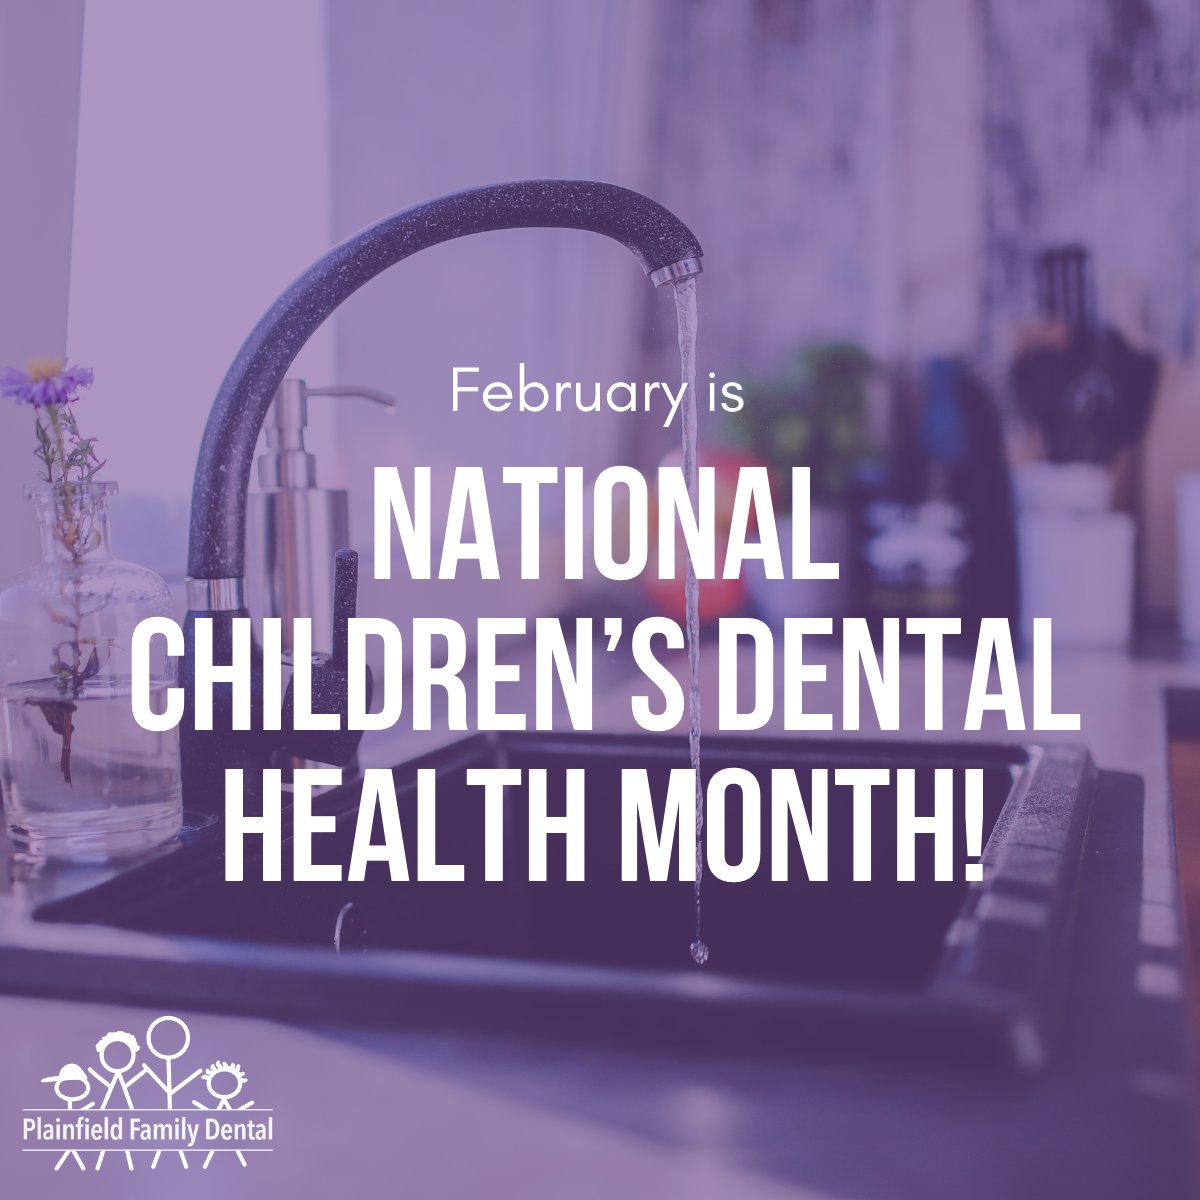 Did you know? According to the CDC, cavities are the most common childhood disease, but they're preventable! Let’s team up against tooth decay with regular check-ups for the kids. 🎖️🦷 #NoMoreCavities #NationalChildrensDentalHealthMonth